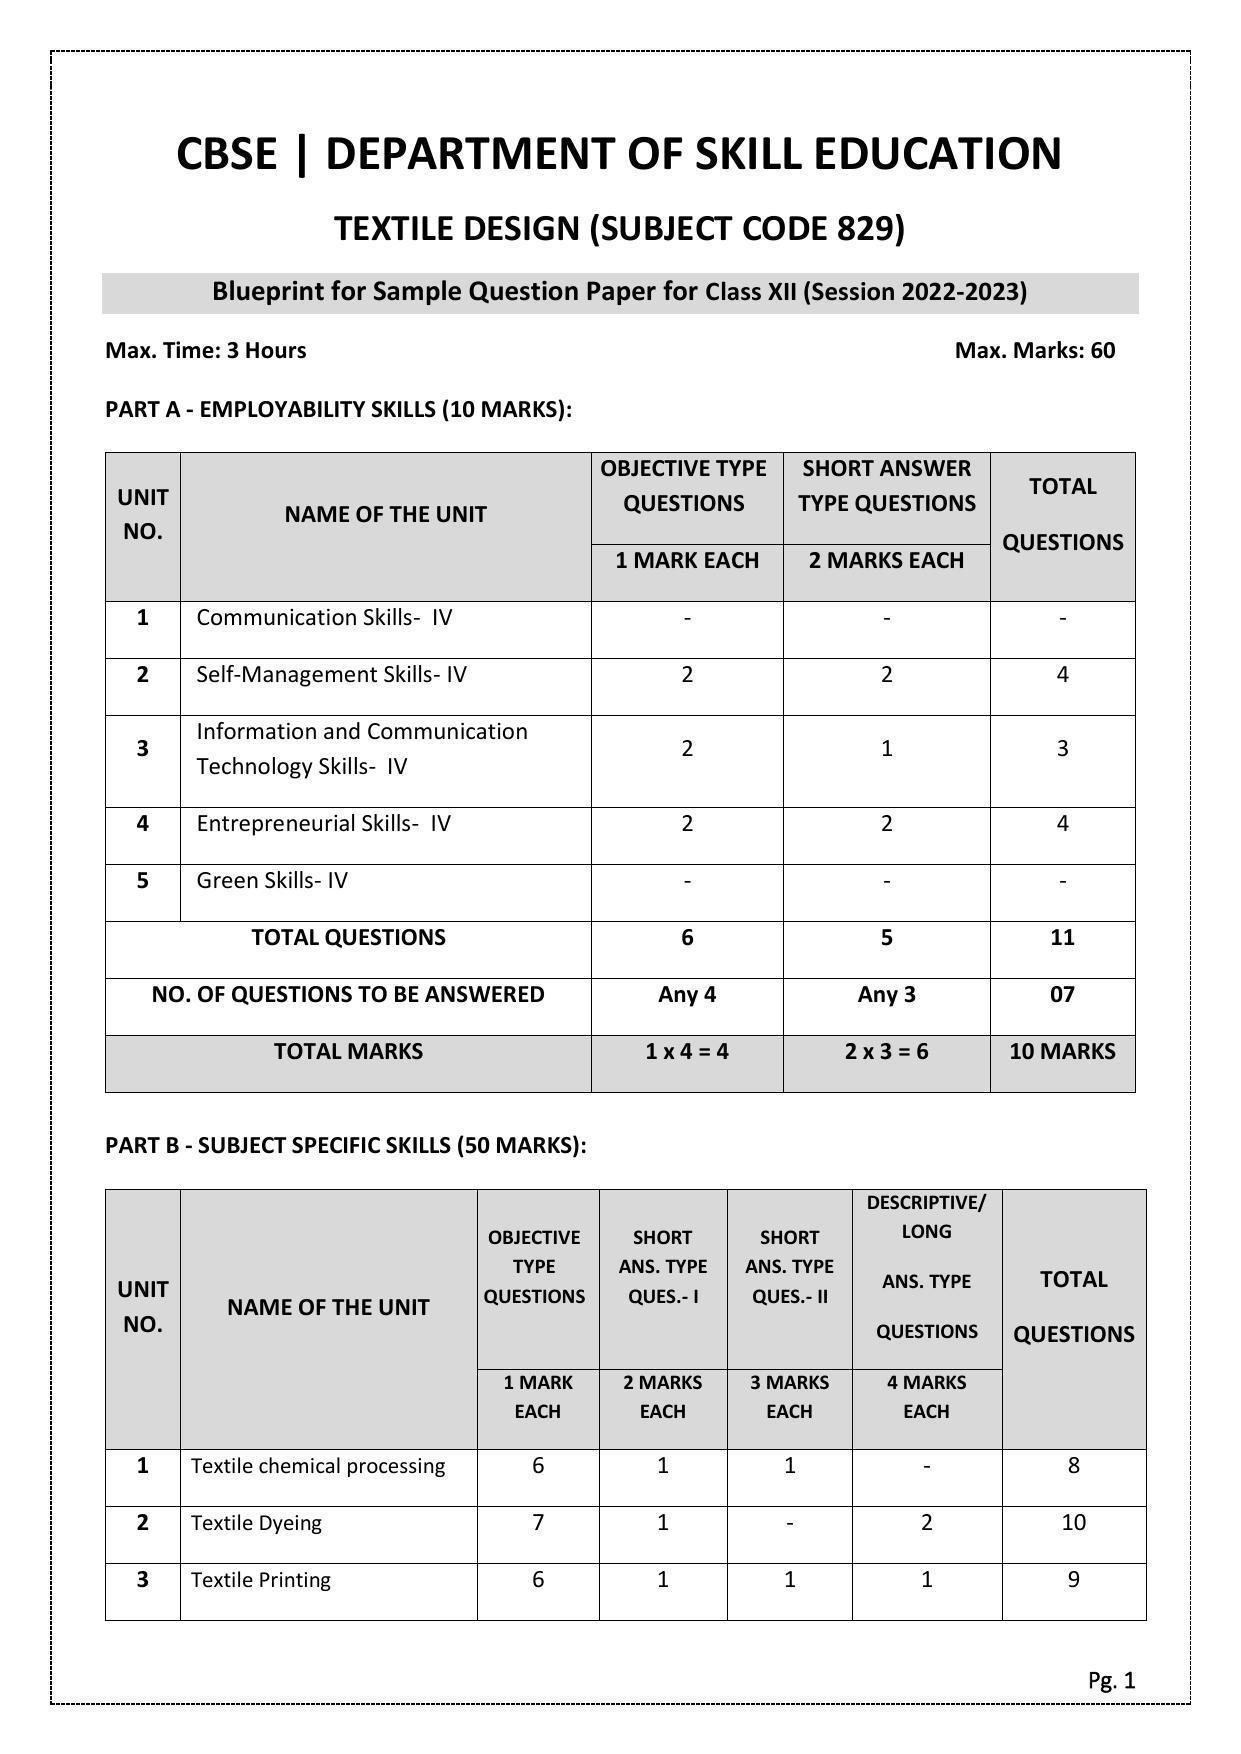 CBSE Class 12 Textile Design (Skill Education) Sample Papers 2023 - Page 1